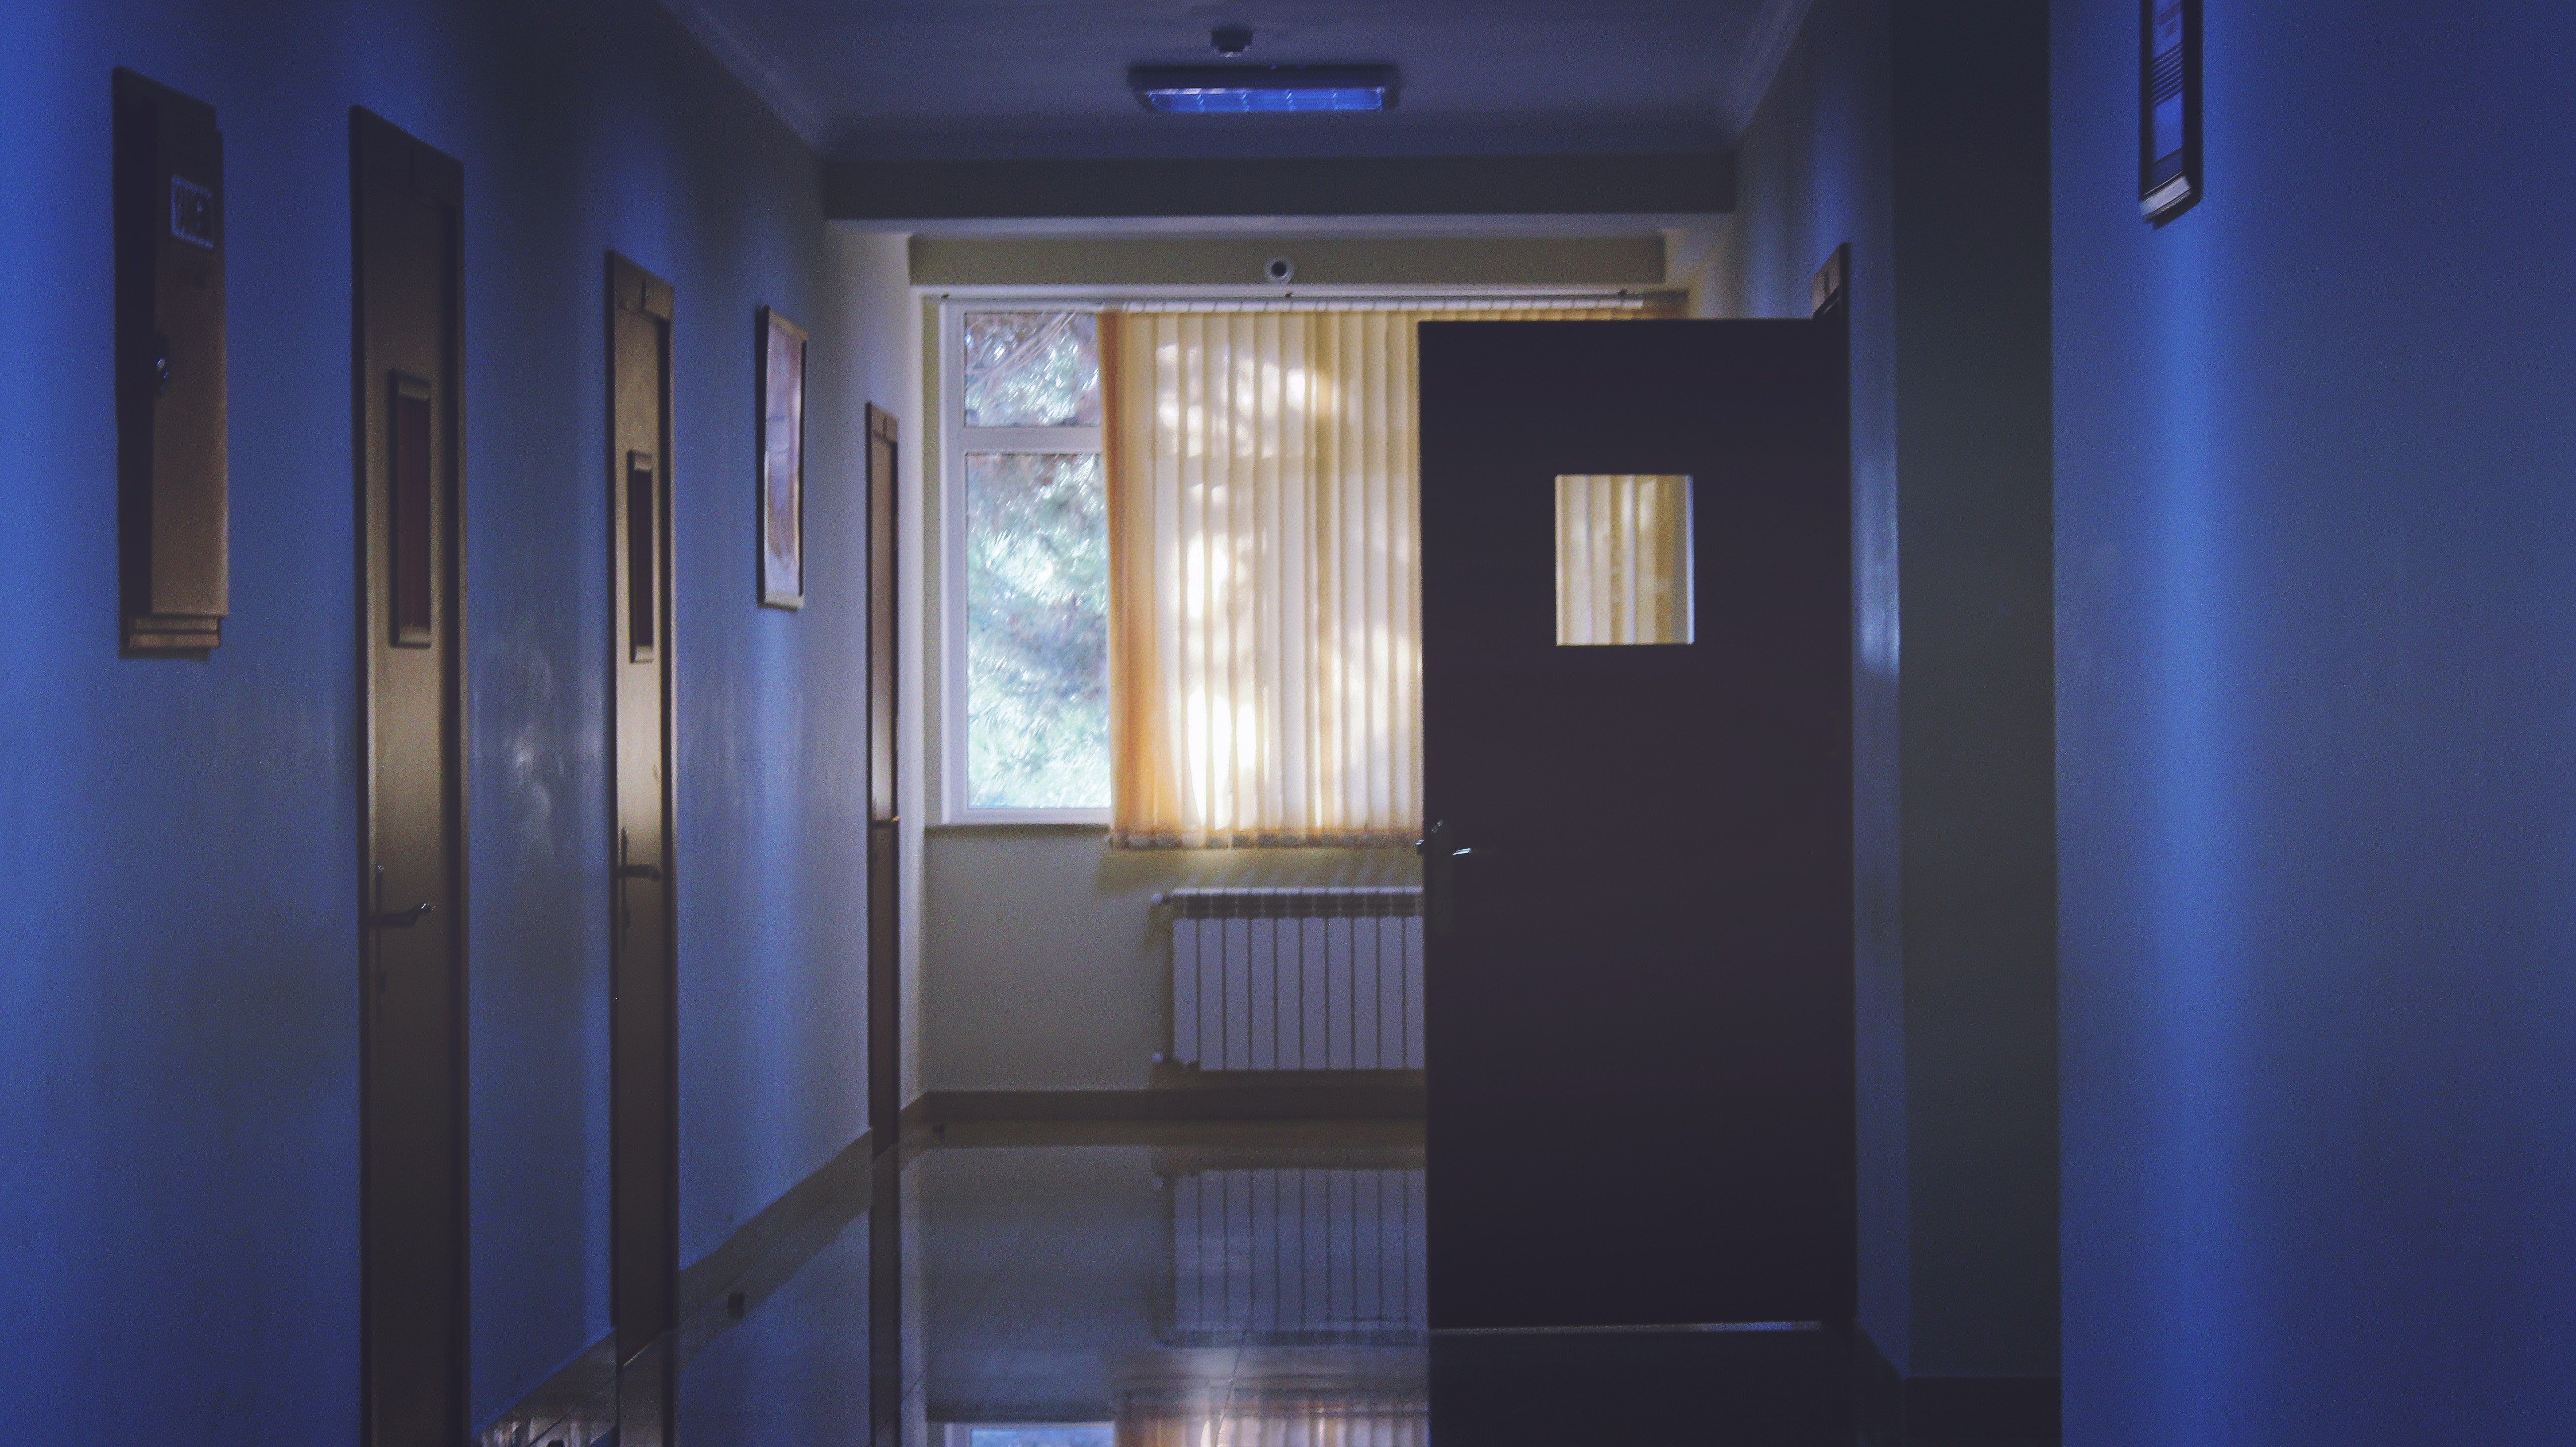 OP found the front door wide open after waking up moments later | Photo: Pexels